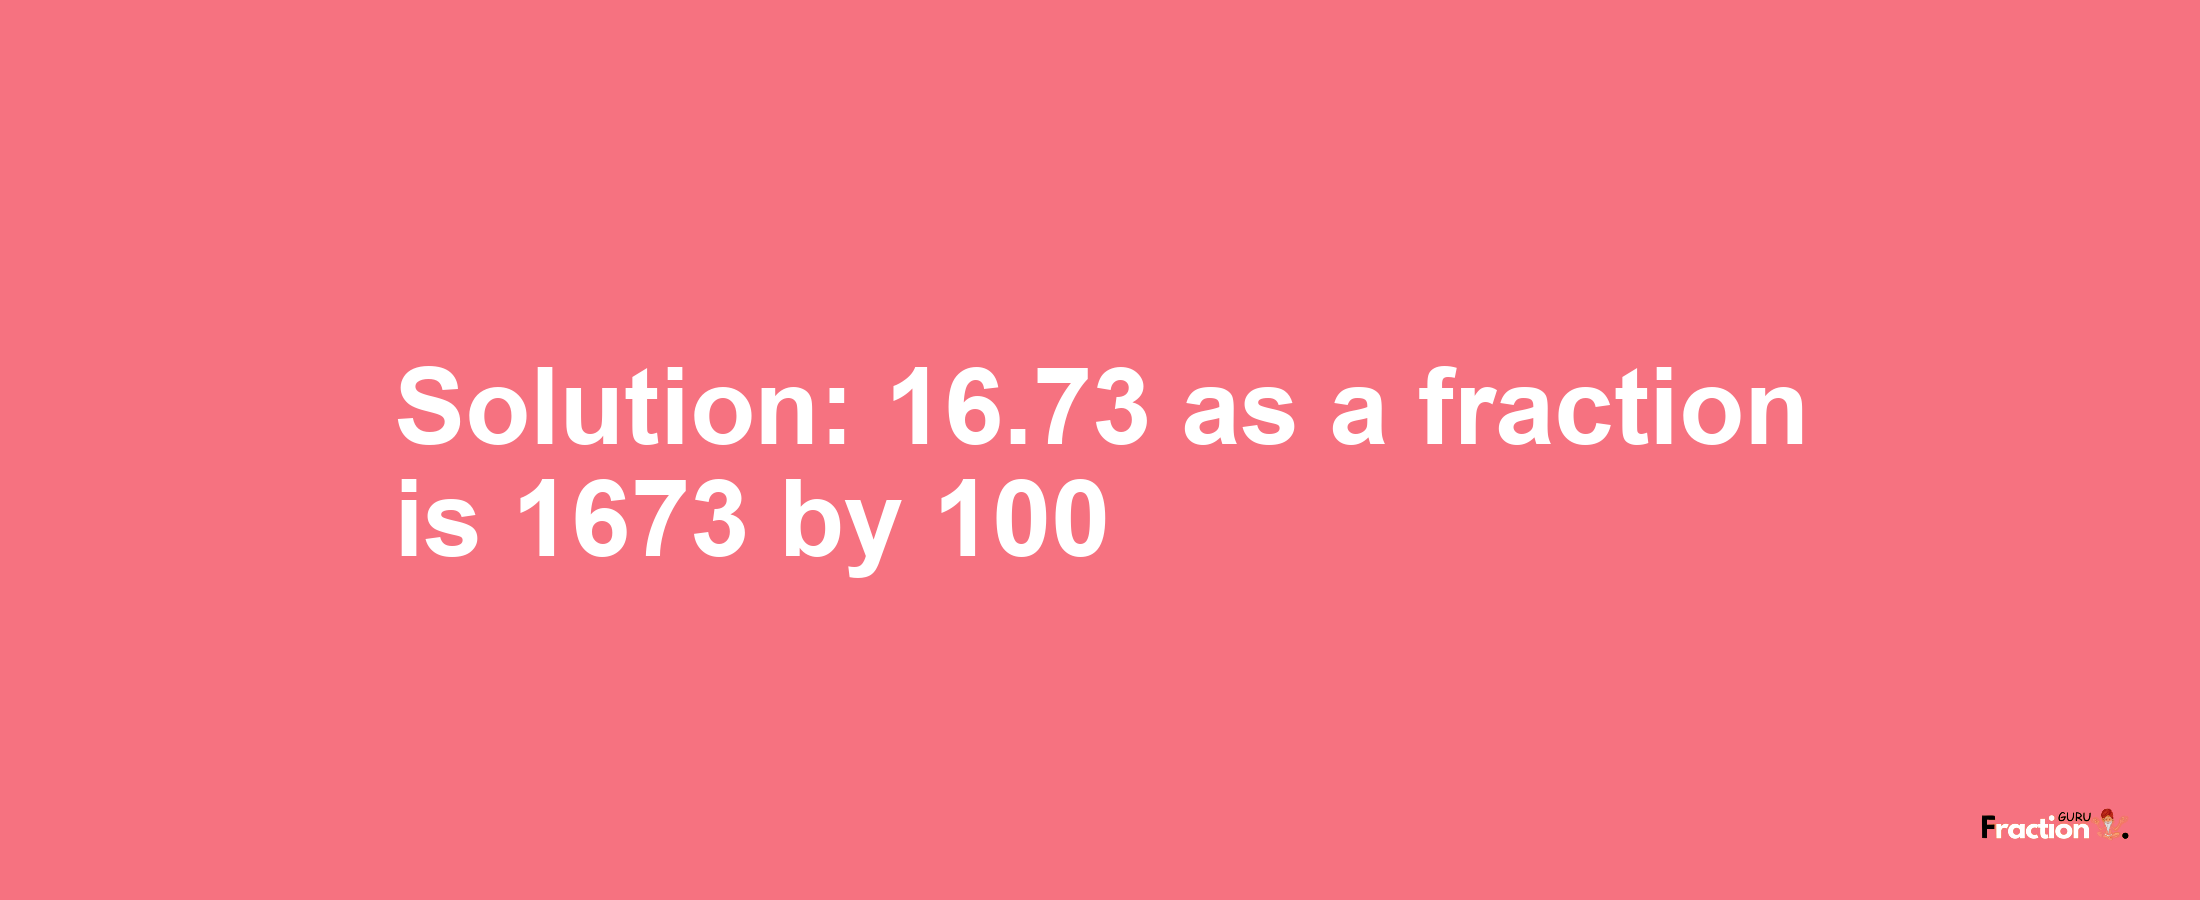 Solution:16.73 as a fraction is 1673/100